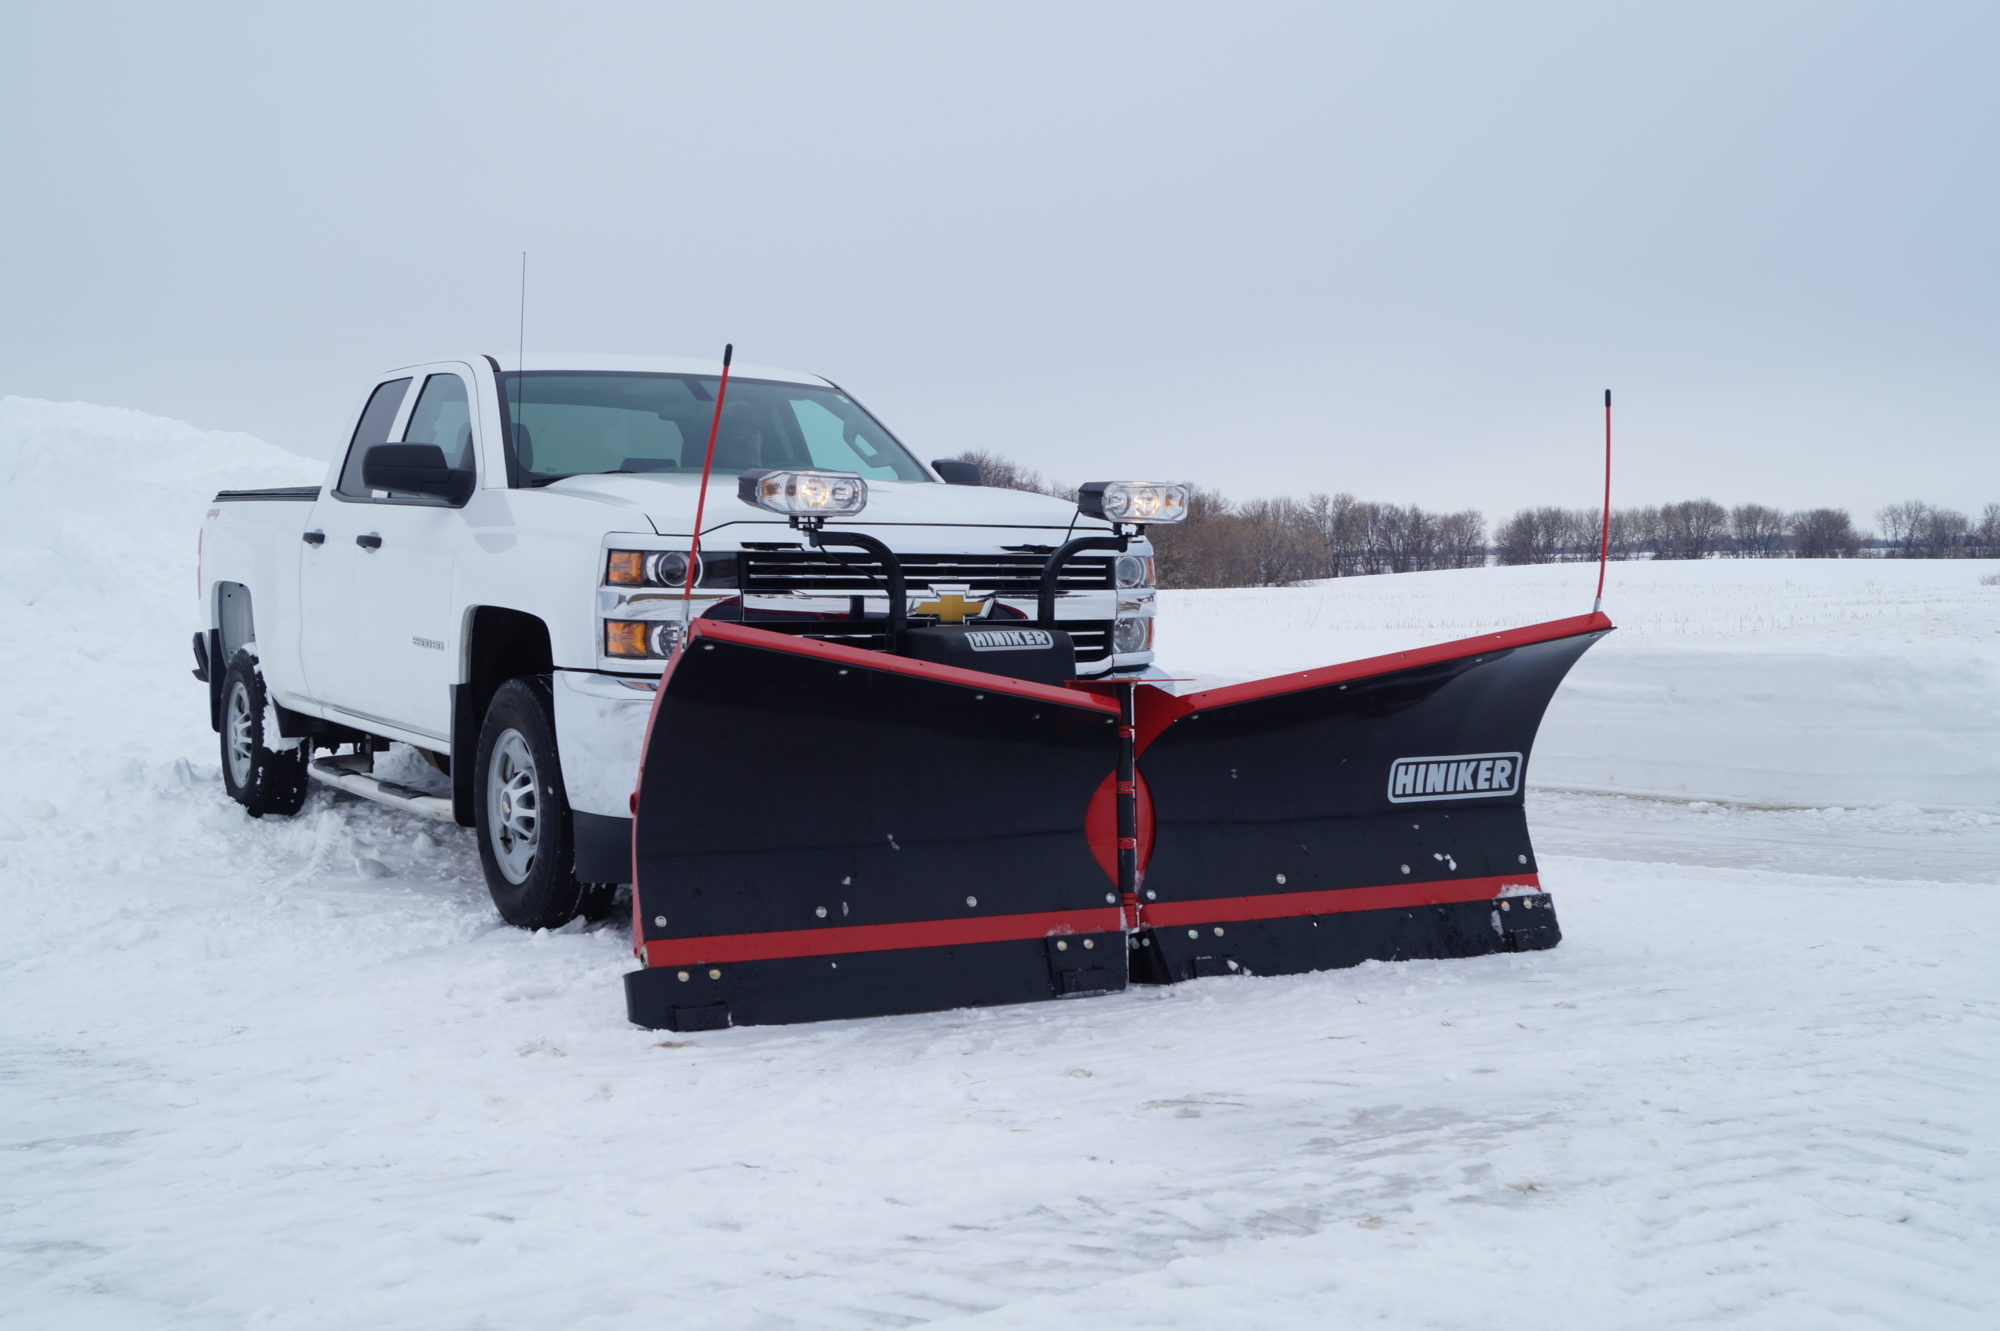 Types of Snow Removal Equipment